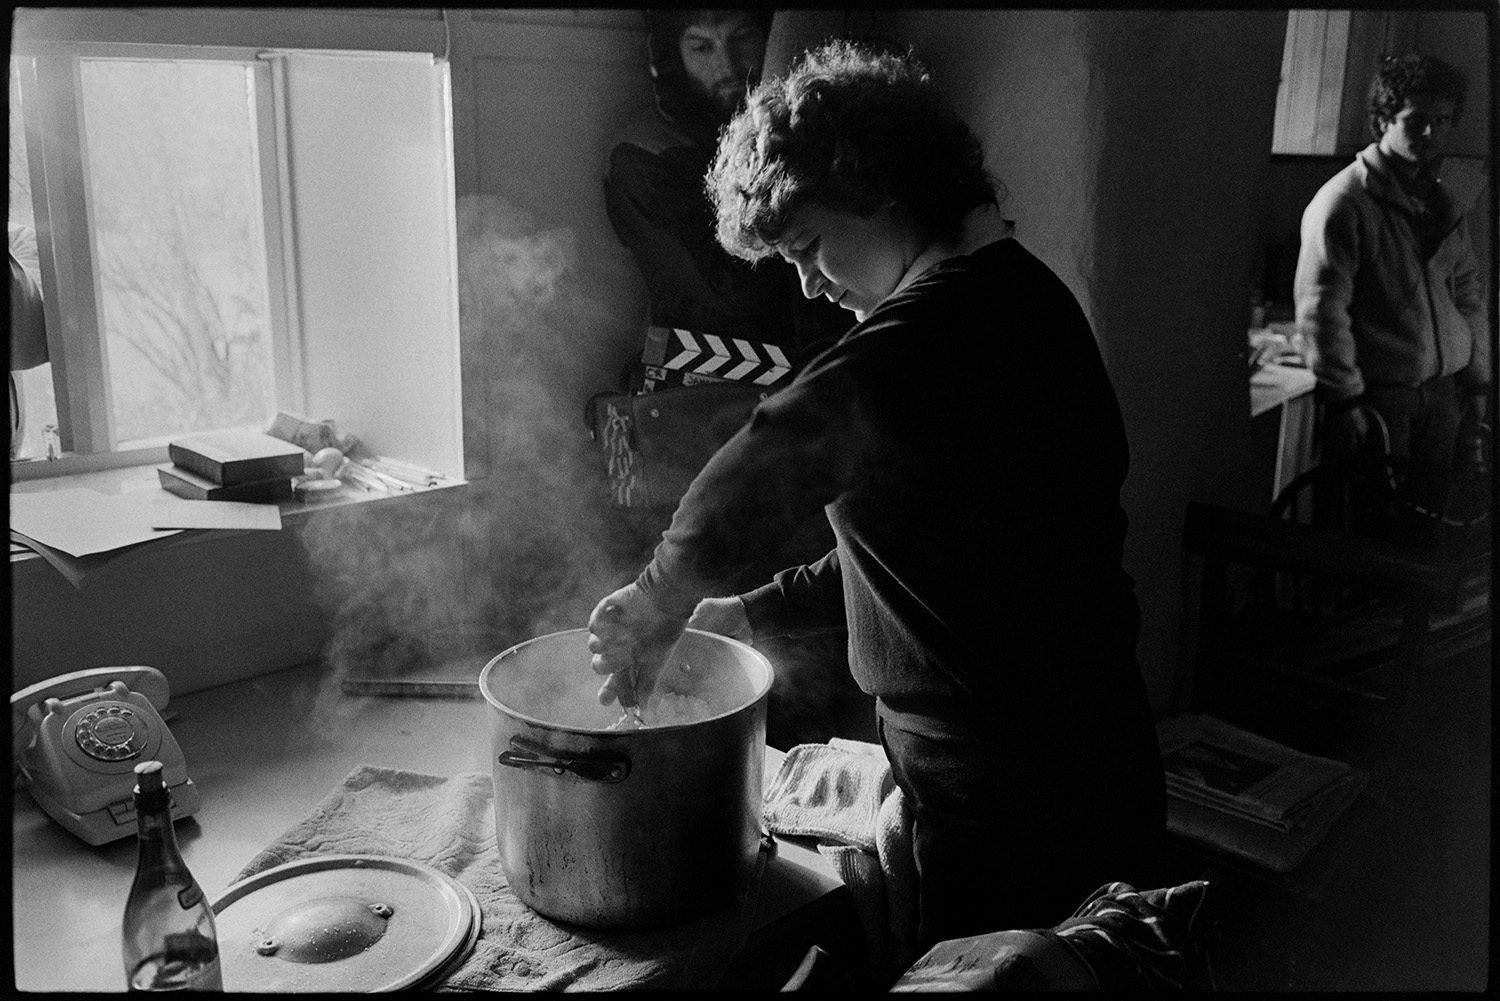 Television film crew filming in hotel kitchen, from BBC.
[A woman mashing potato in a large saucepan in the kitchen at the Duke of York, Iddesleigh, with a cameraman filming her.]